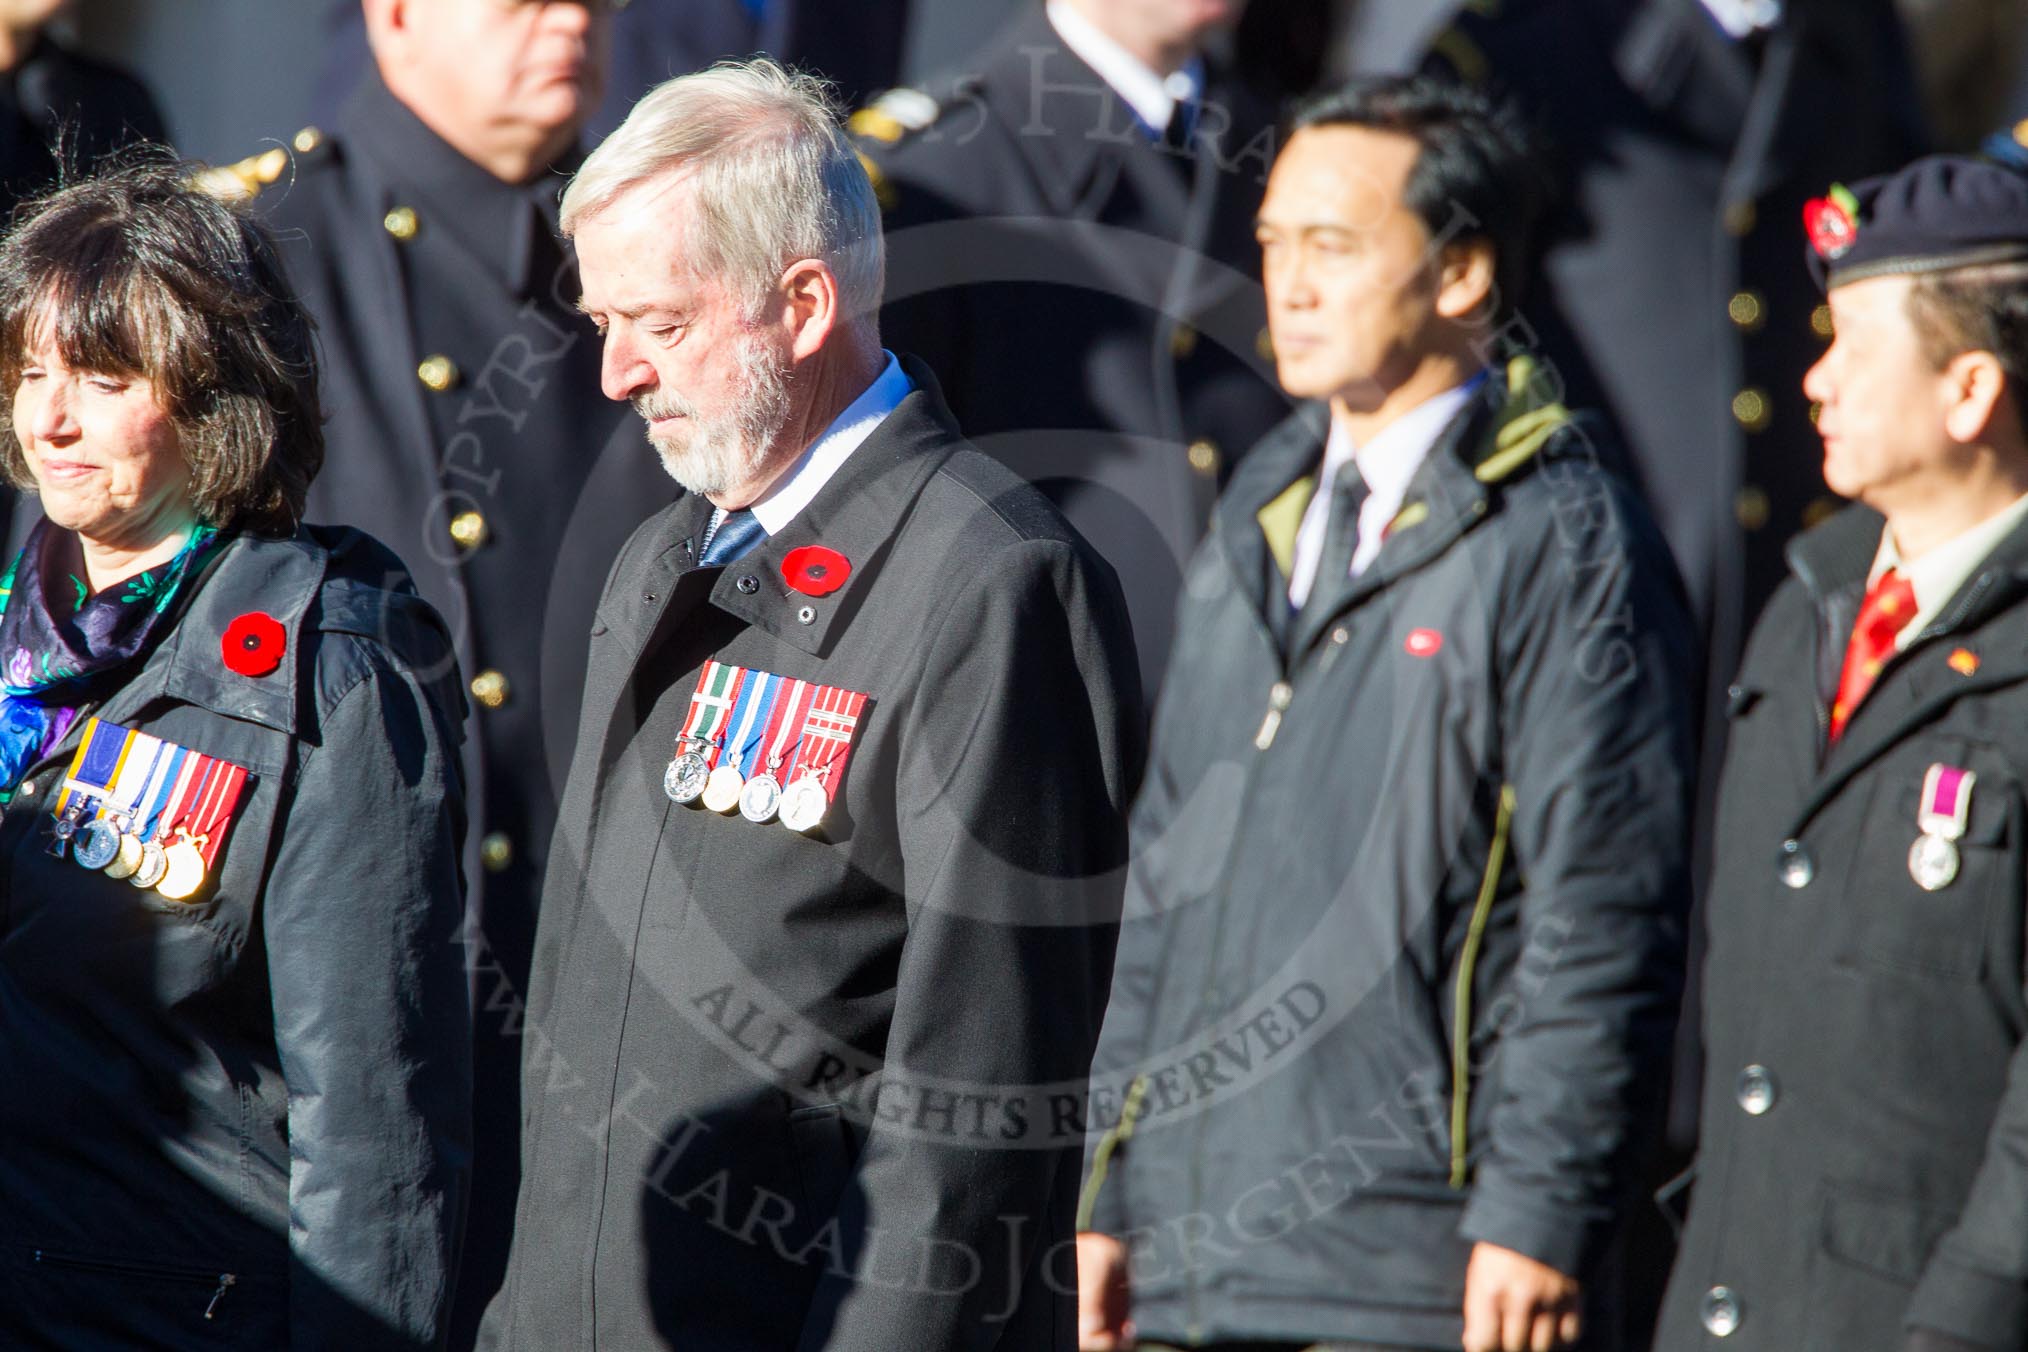 Remembrance Sunday Cenotaph March Past 2013: D7 - Canadian Veterans Association..
Press stand opposite the Foreign Office building, Whitehall, London SW1,
London,
Greater London,
United Kingdom,
on 10 November 2013 at 11:39, image #74